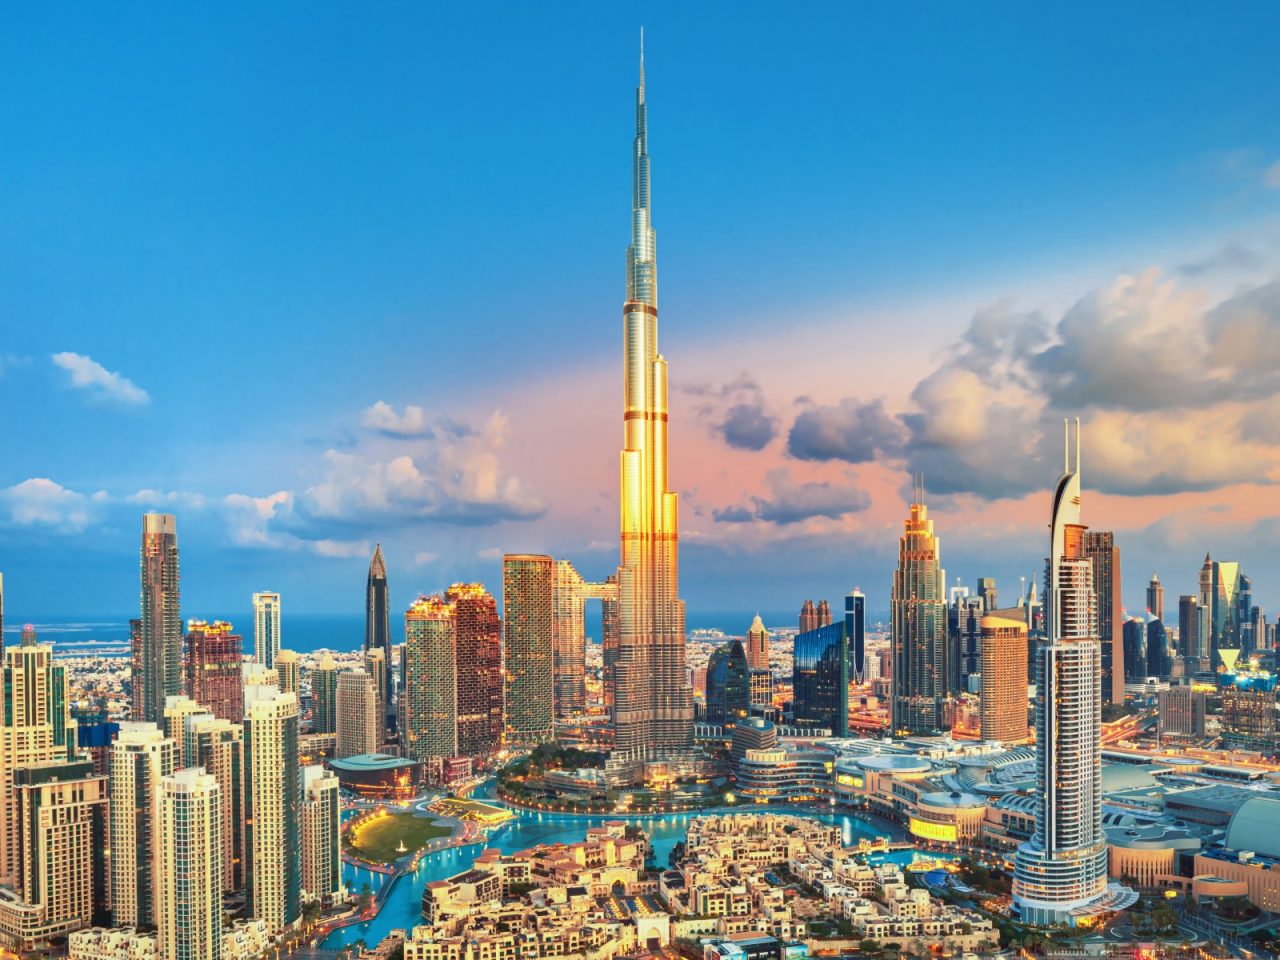 What Are the Most Popular Sectors for Starting a Business in Dubai?